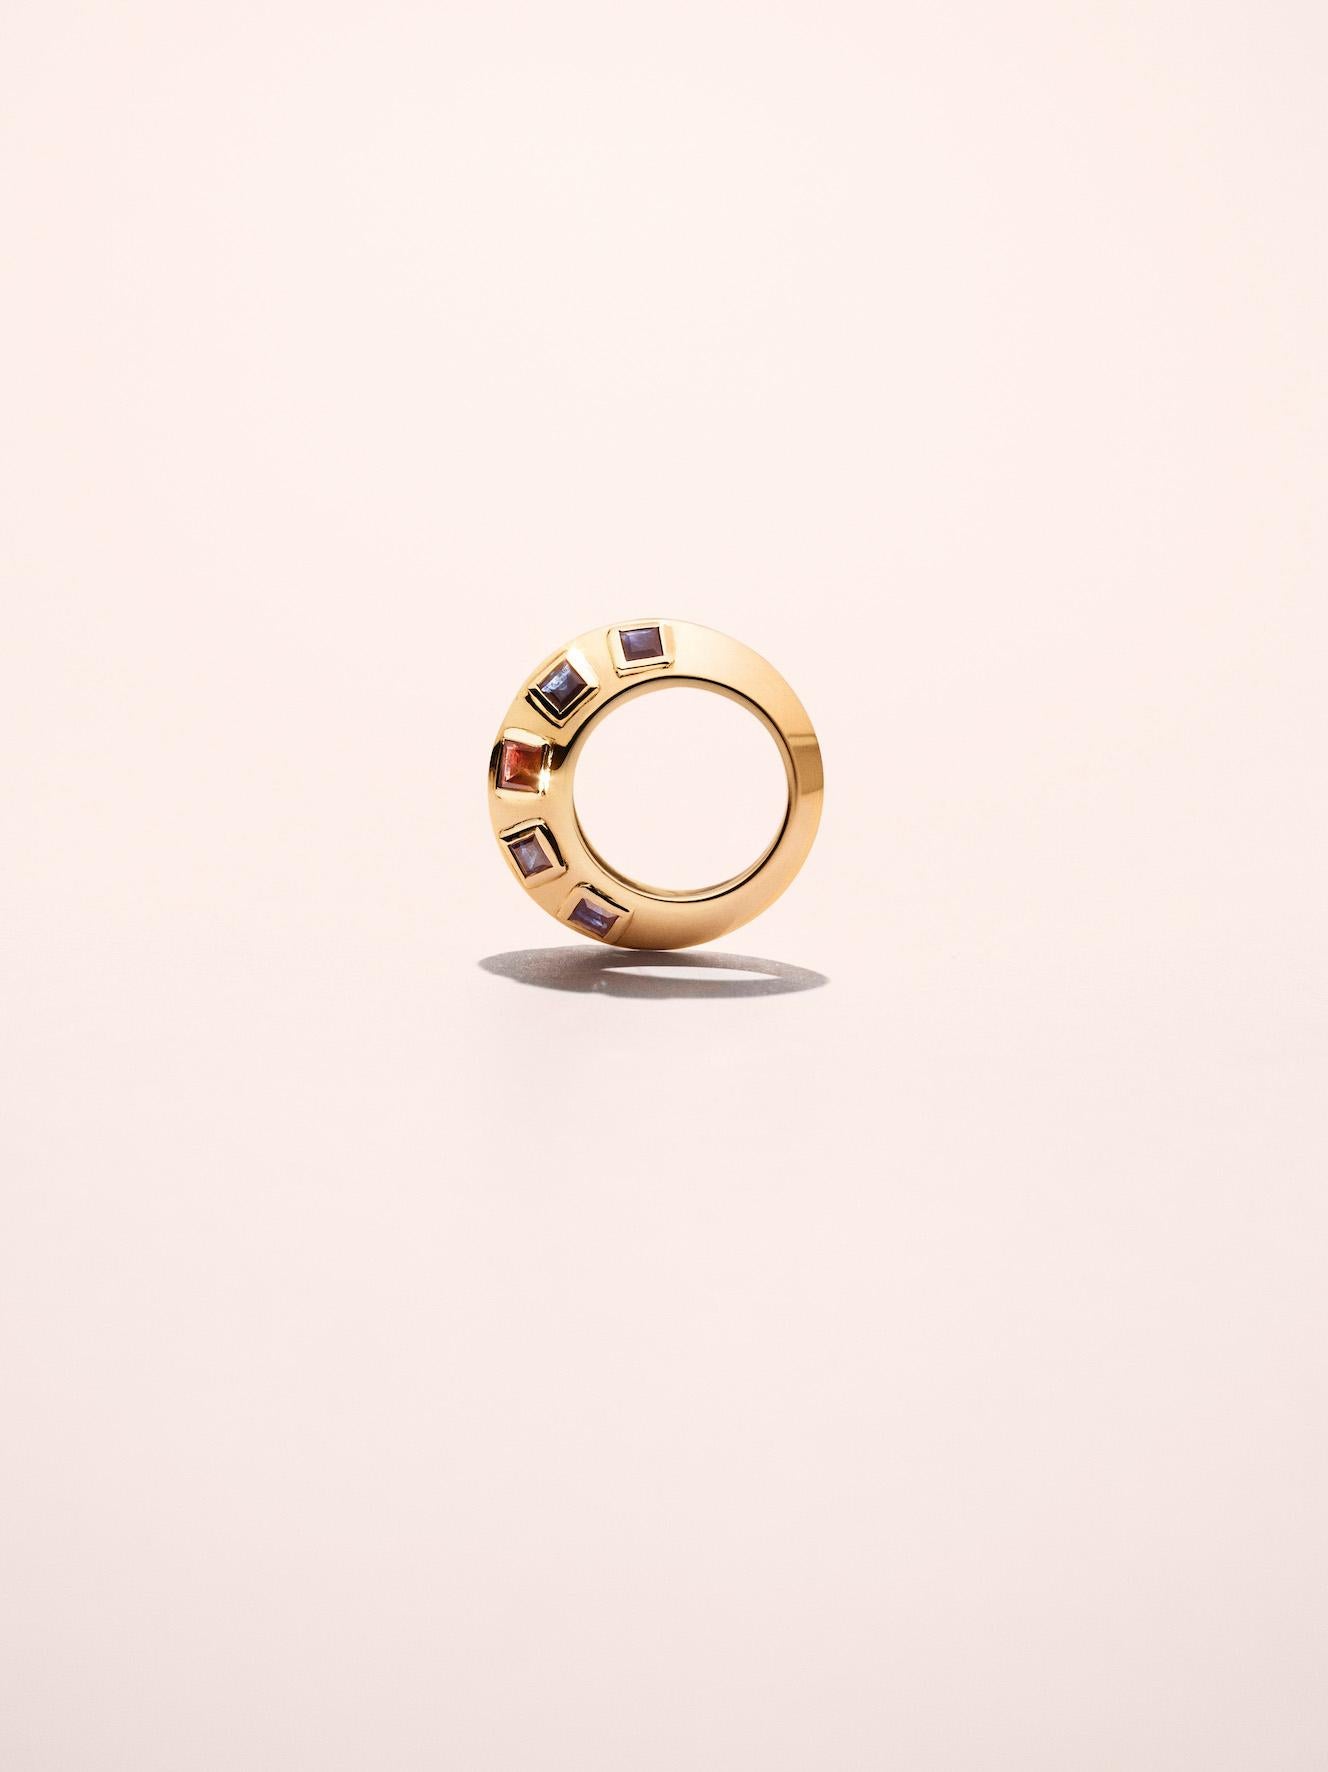 Constantin is a geometric cocktail ring, set with 10 gems (blue sapphires and garnet) on 18k yellow gold.
Its design refers to the sculpture of Constantin Brancusi.
SIZE : 51